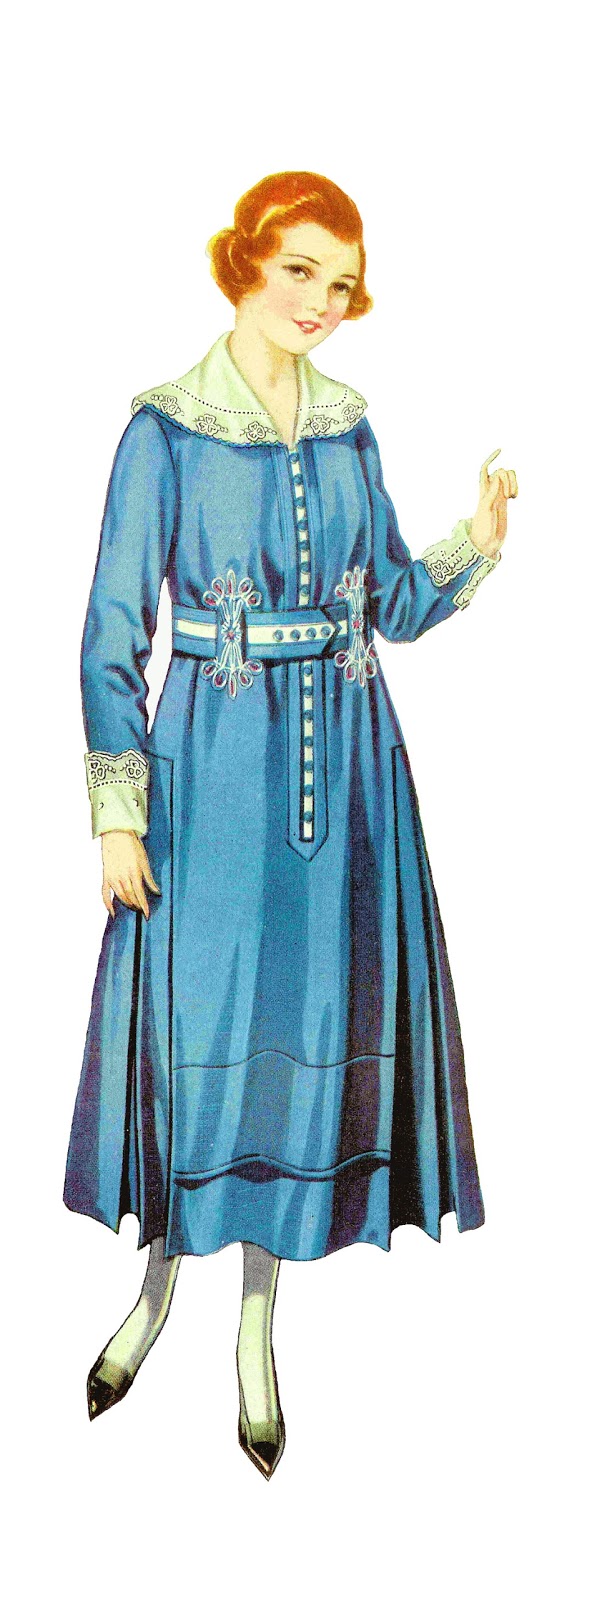 clipart of ladies clothes - photo #44